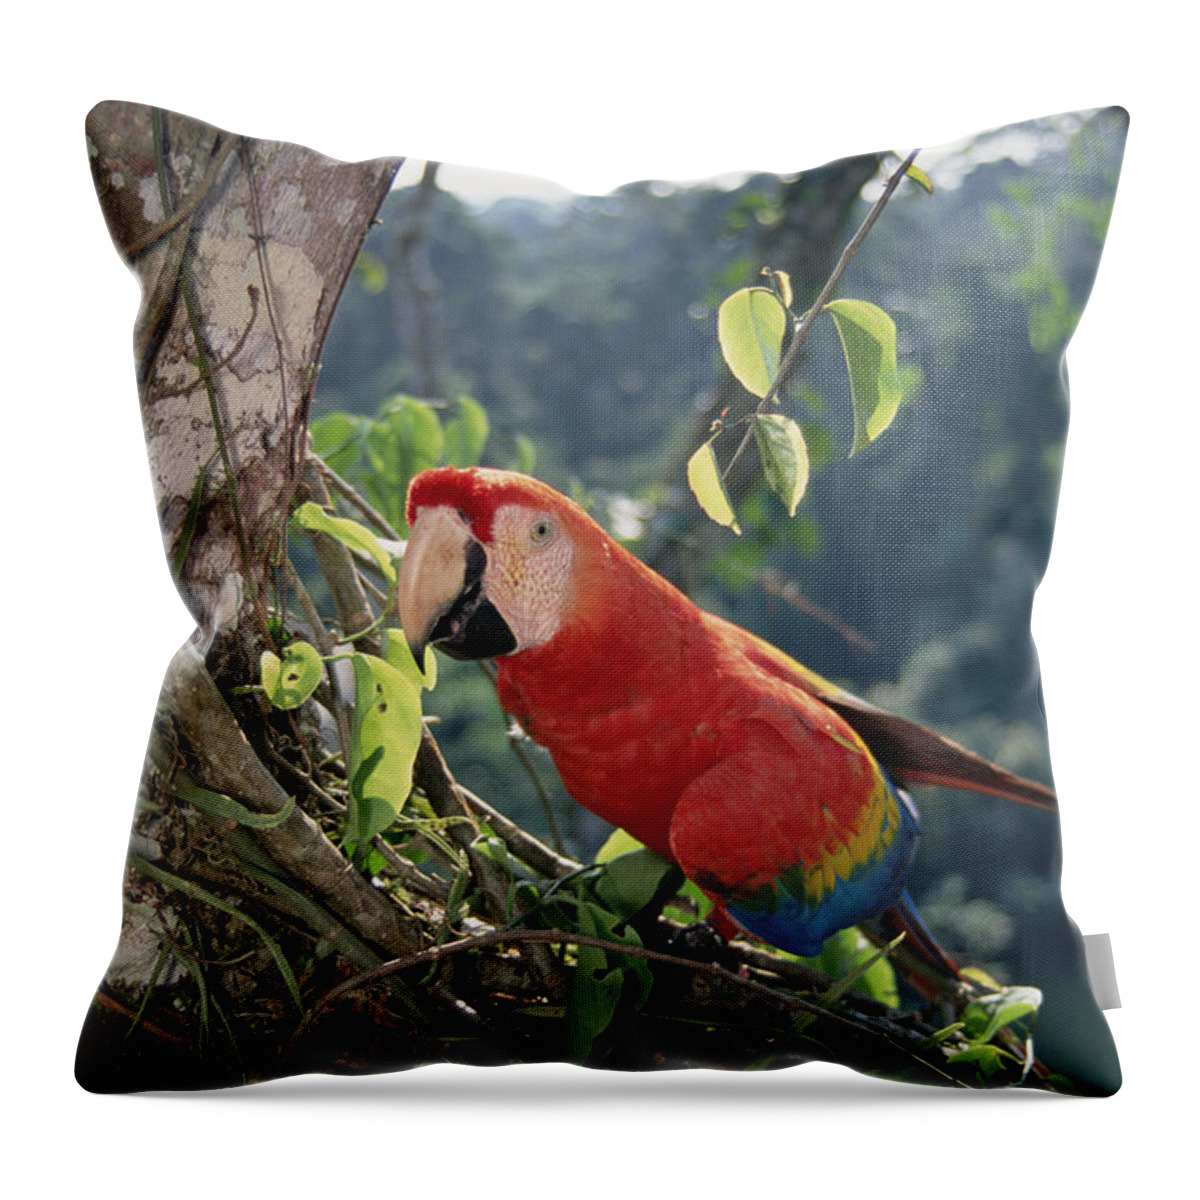 Feb0514 Throw Pillow featuring the photograph Scarlet Macaw In Rainforest Canopy by Tui De Roy